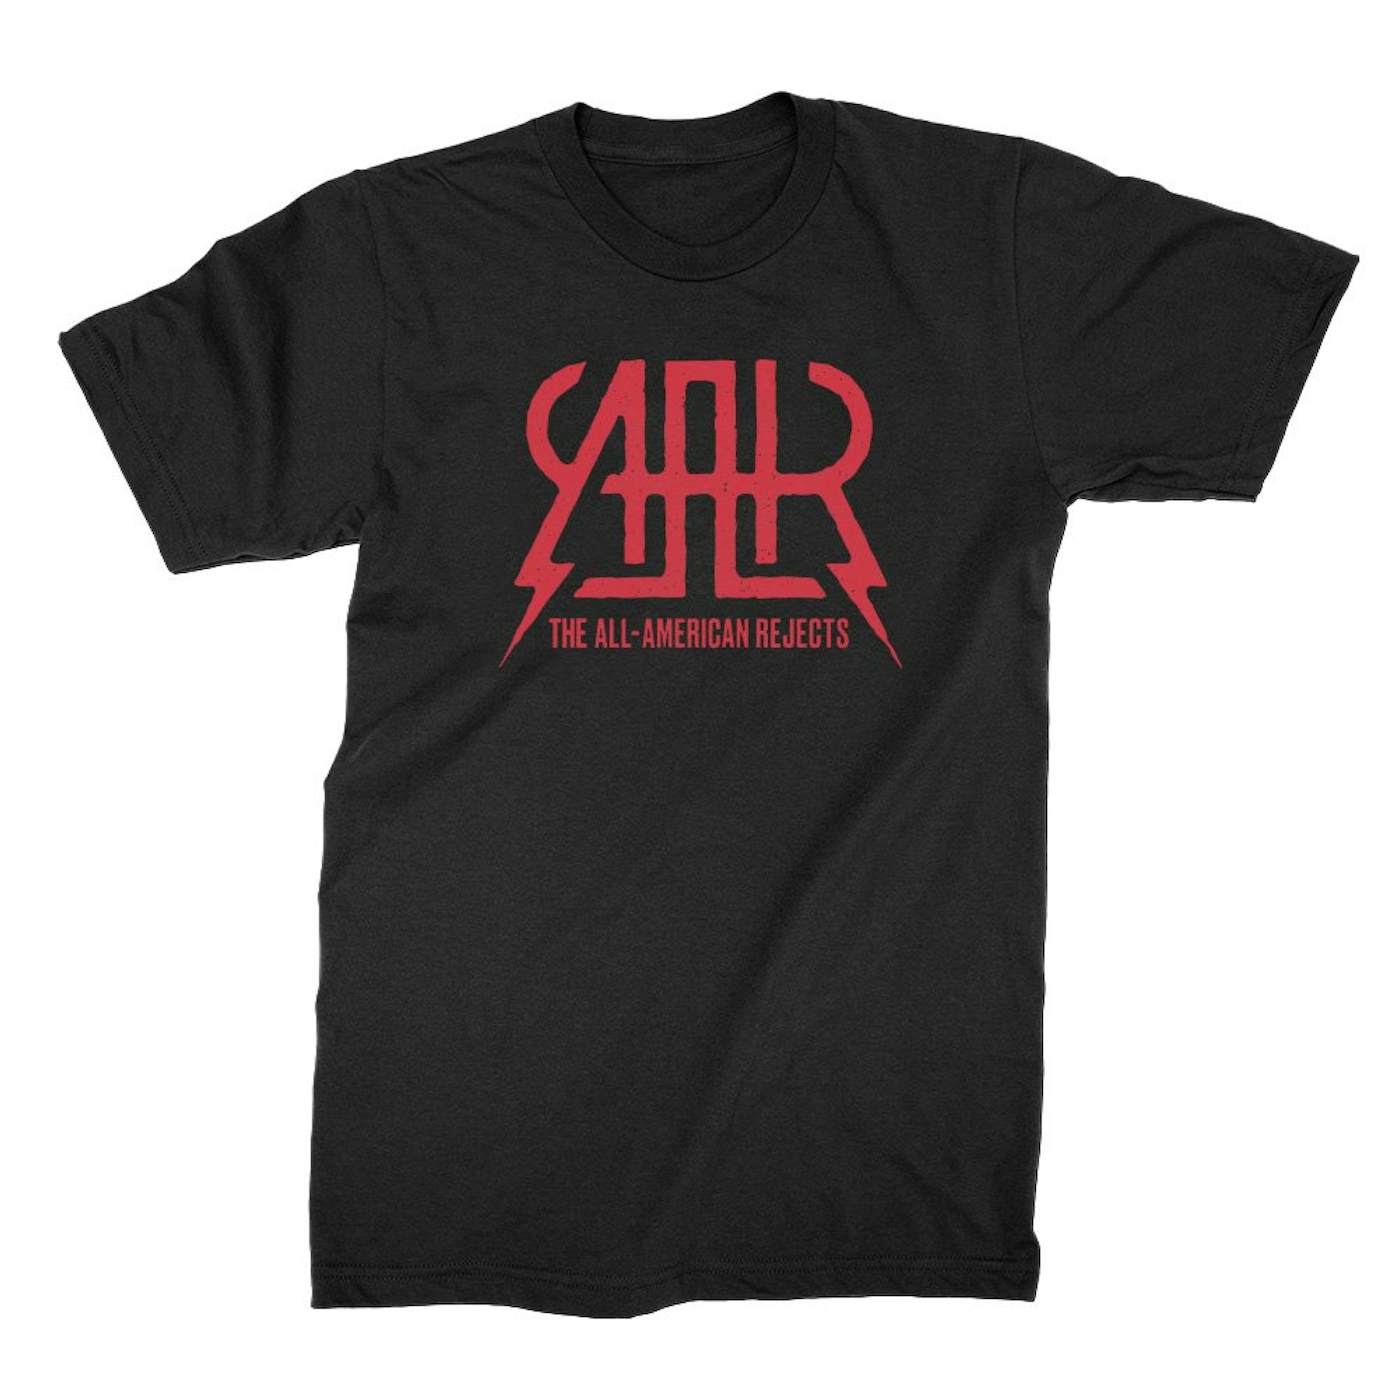 The All-American Rejects Logo Tee (Black)